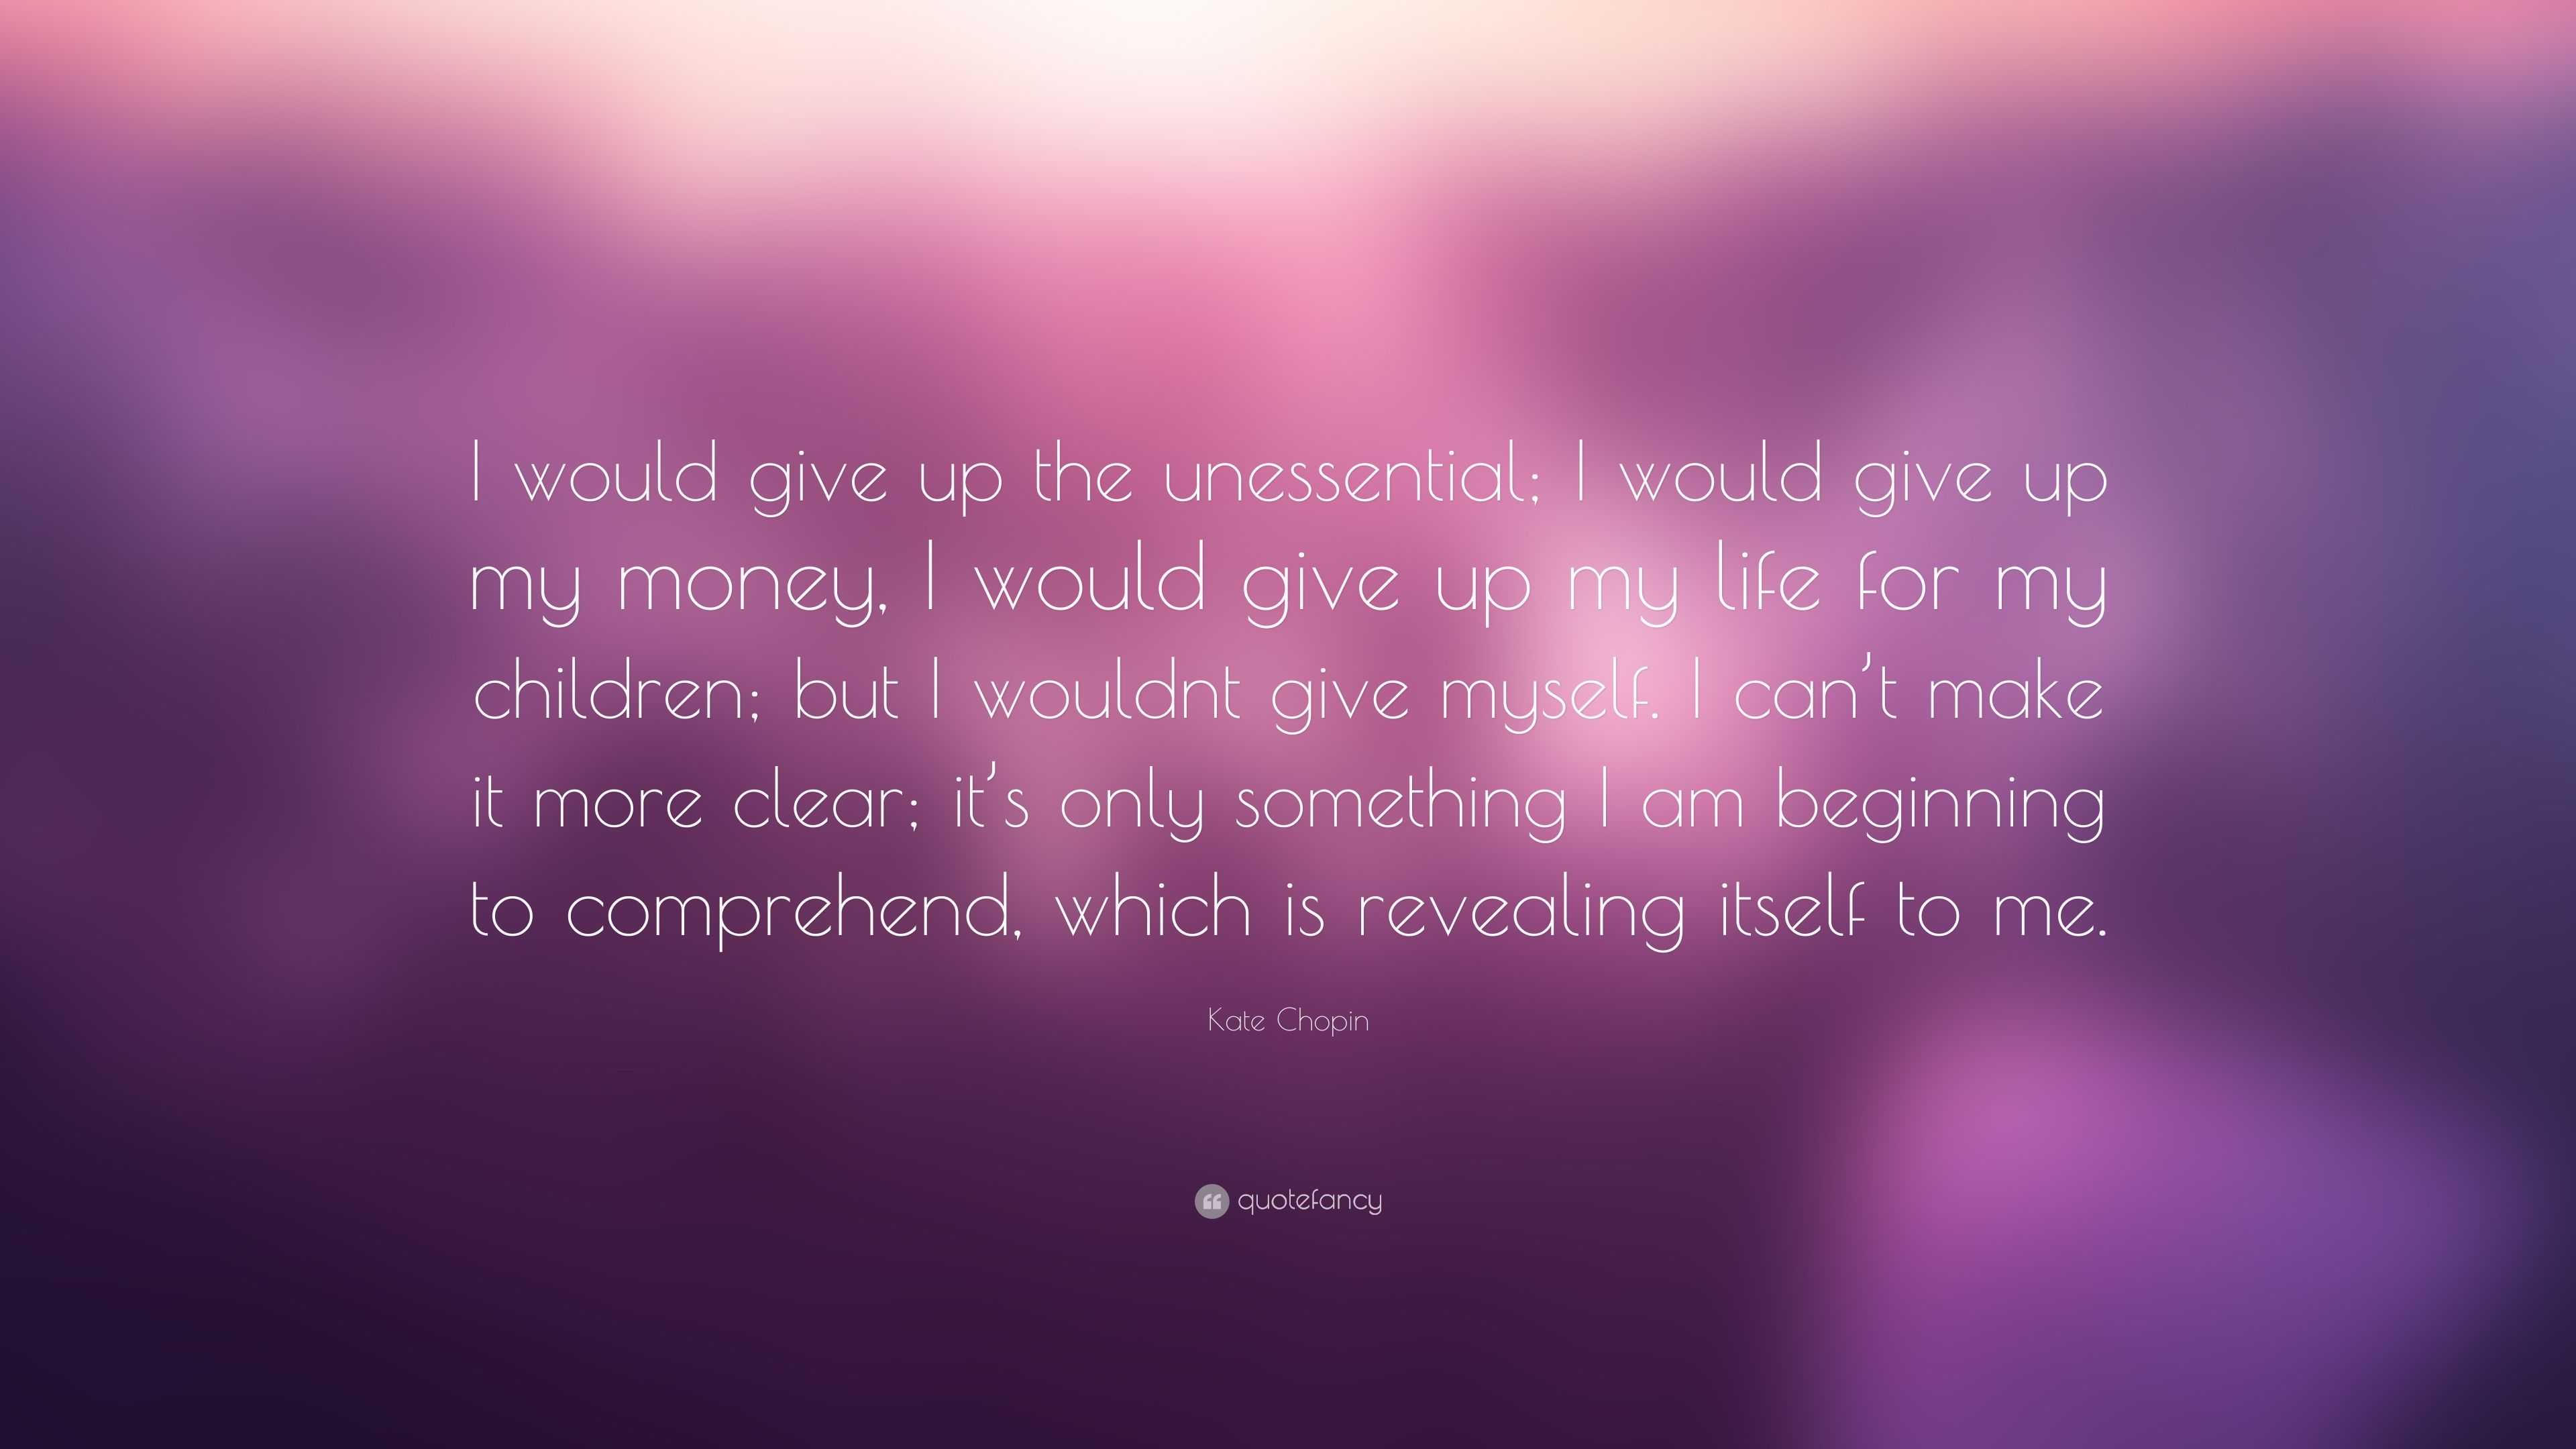 Kate Chopin Quote: “I would give up the unessential; I would give up my ...